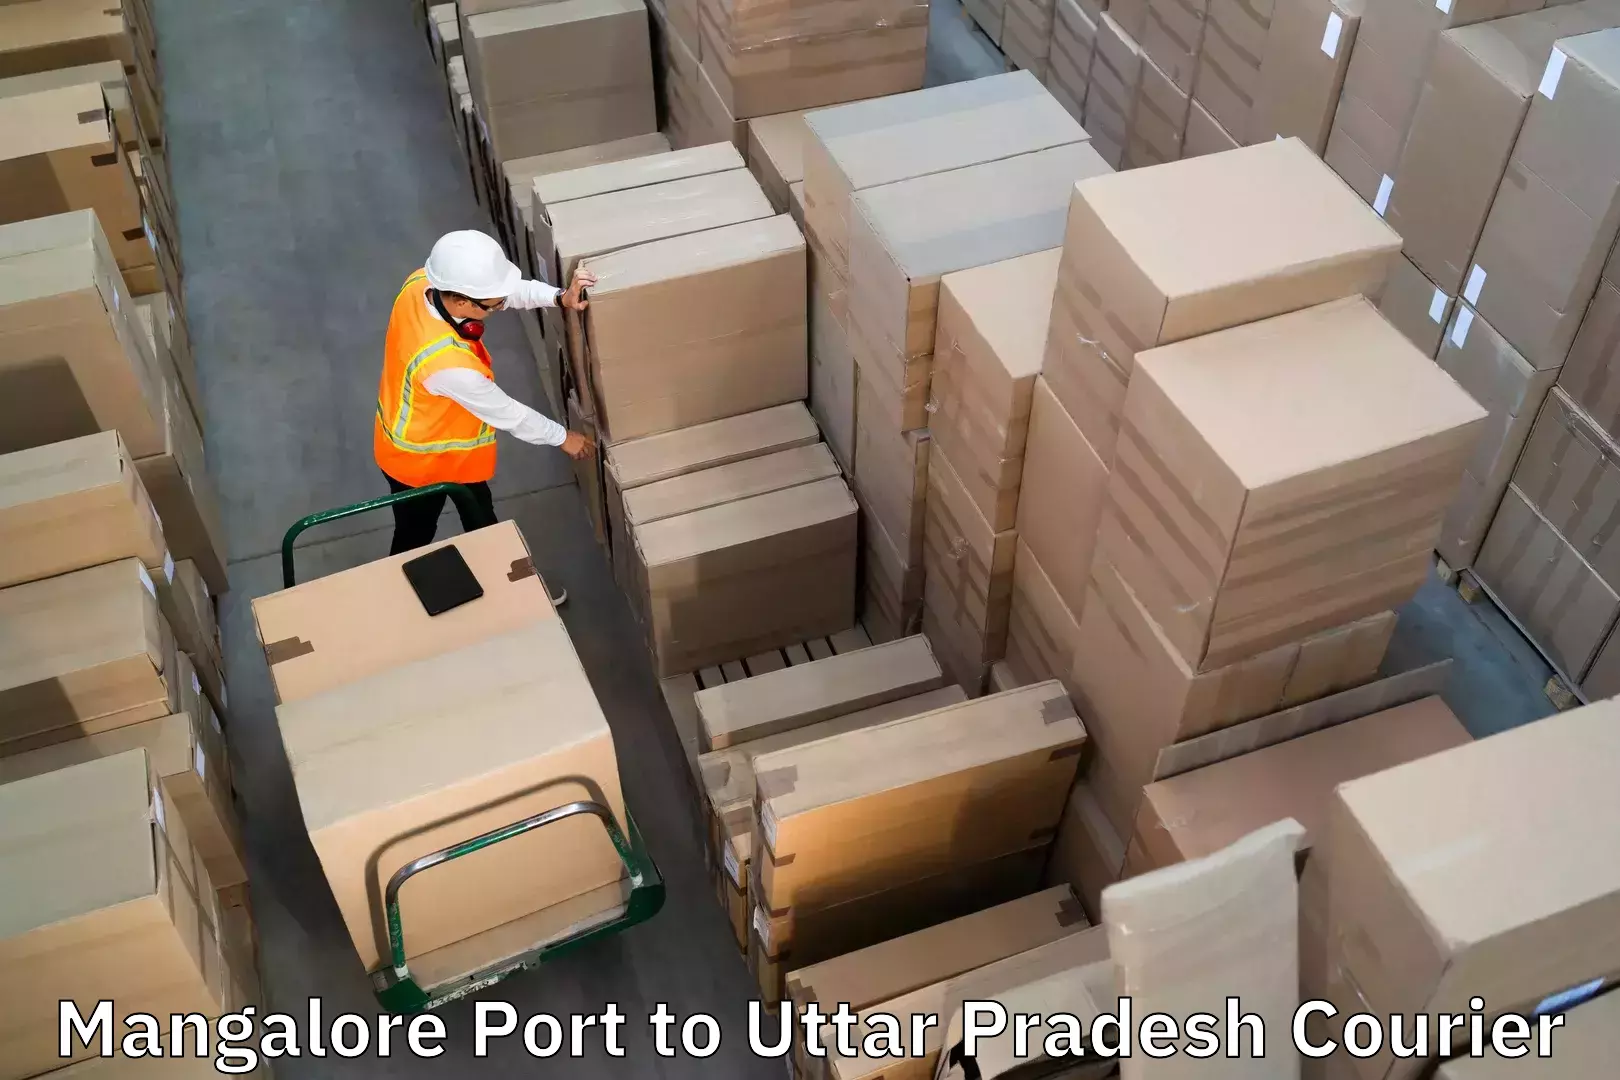 Fast track baggage delivery in Mangalore Port to Shikohabad